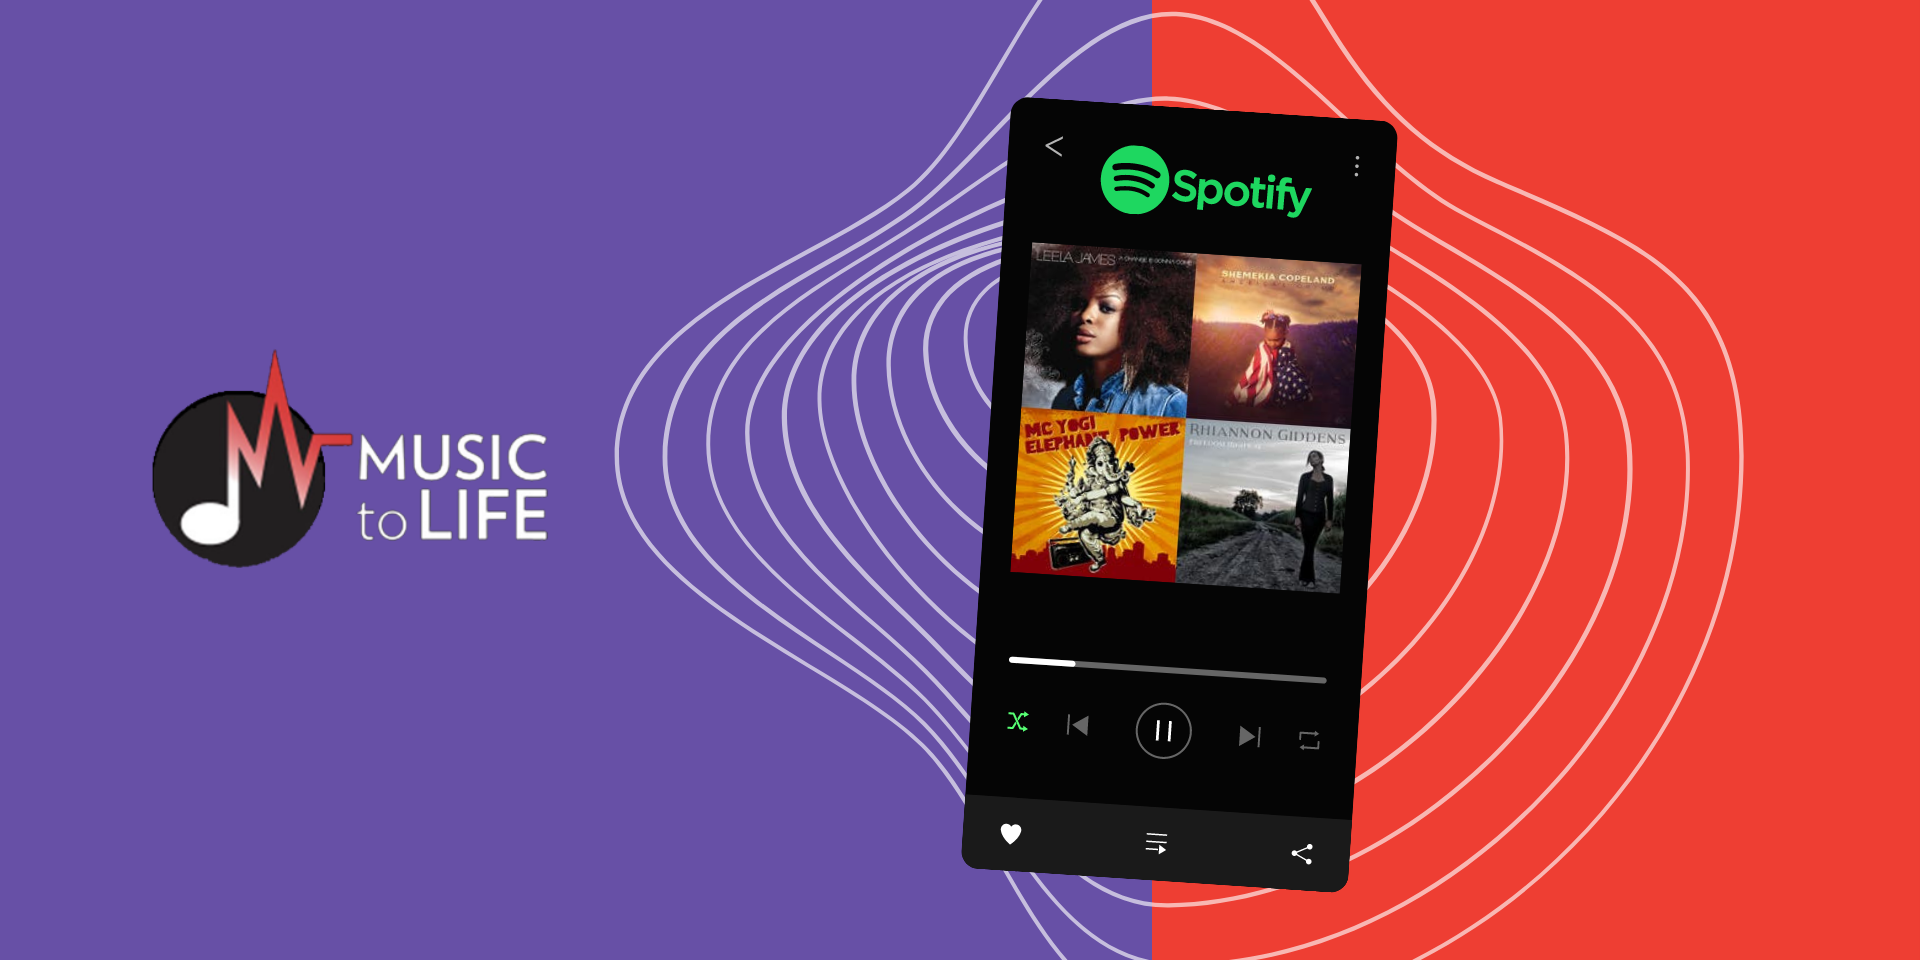 Here’s what we’re listening to…